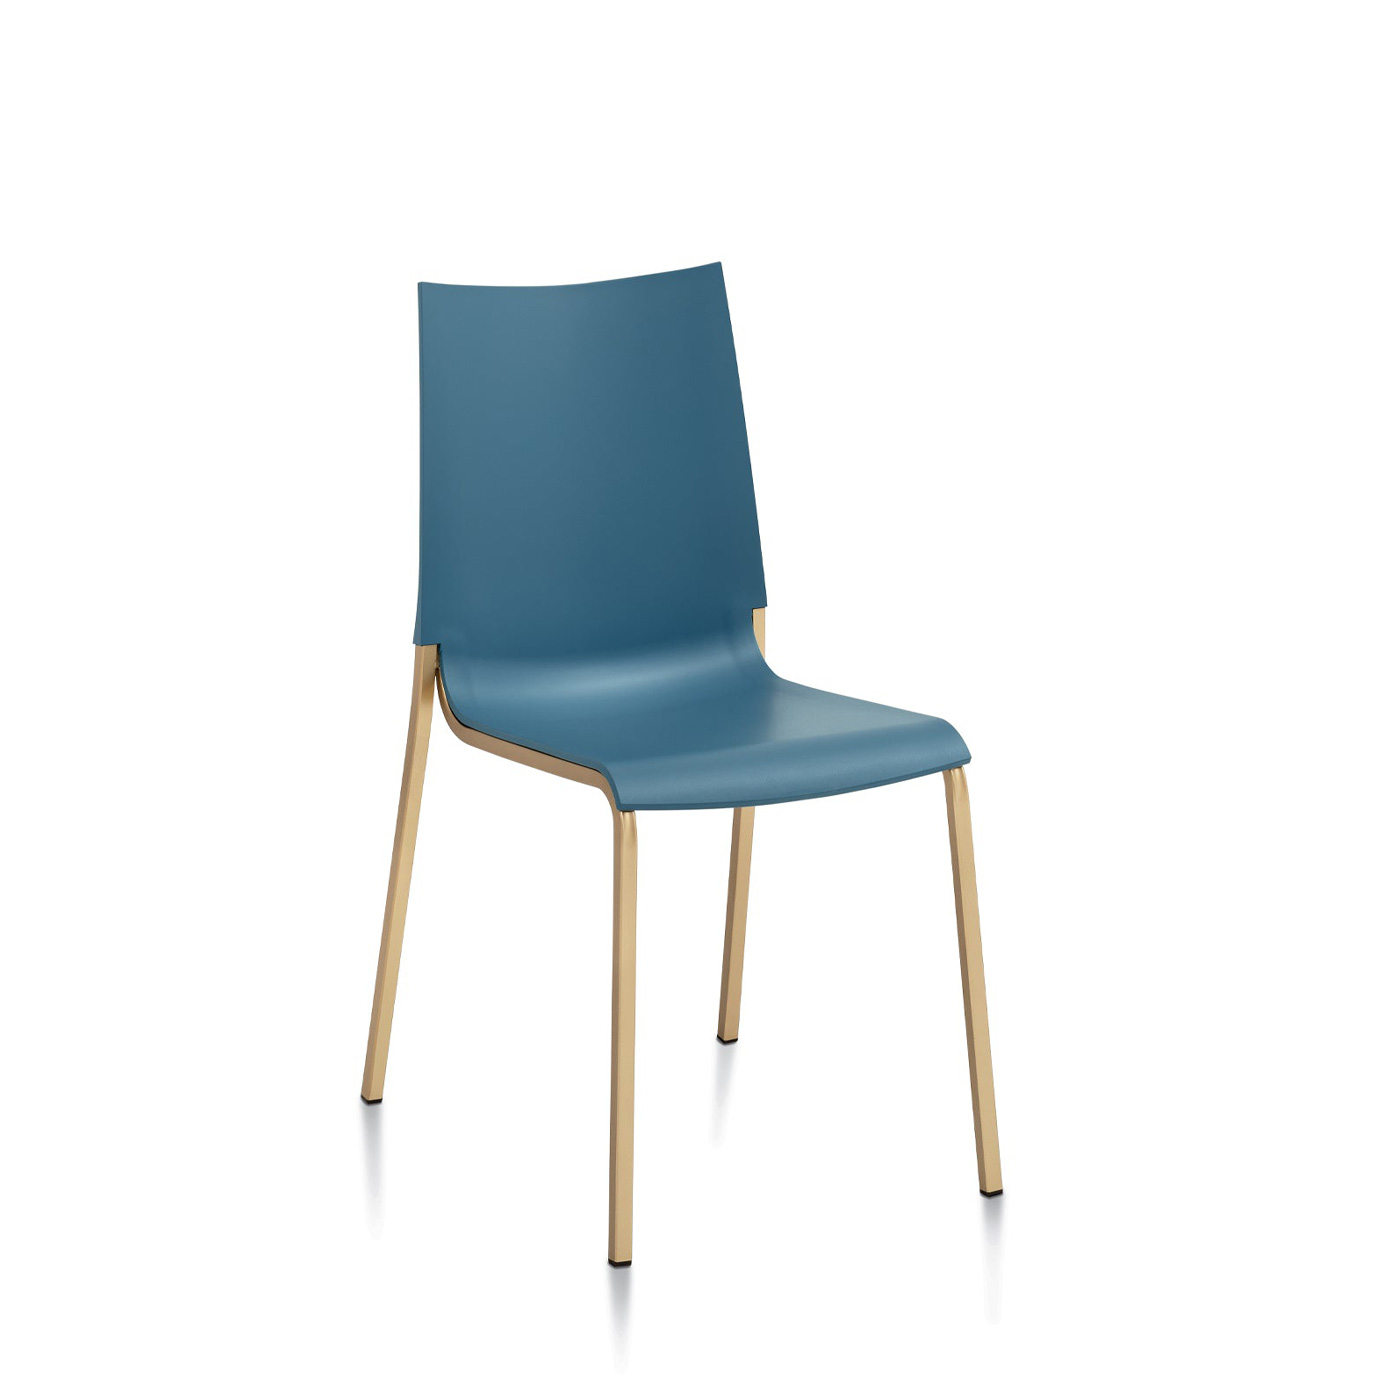 Bontempi Casa Luxury, High-End Dining Chairs